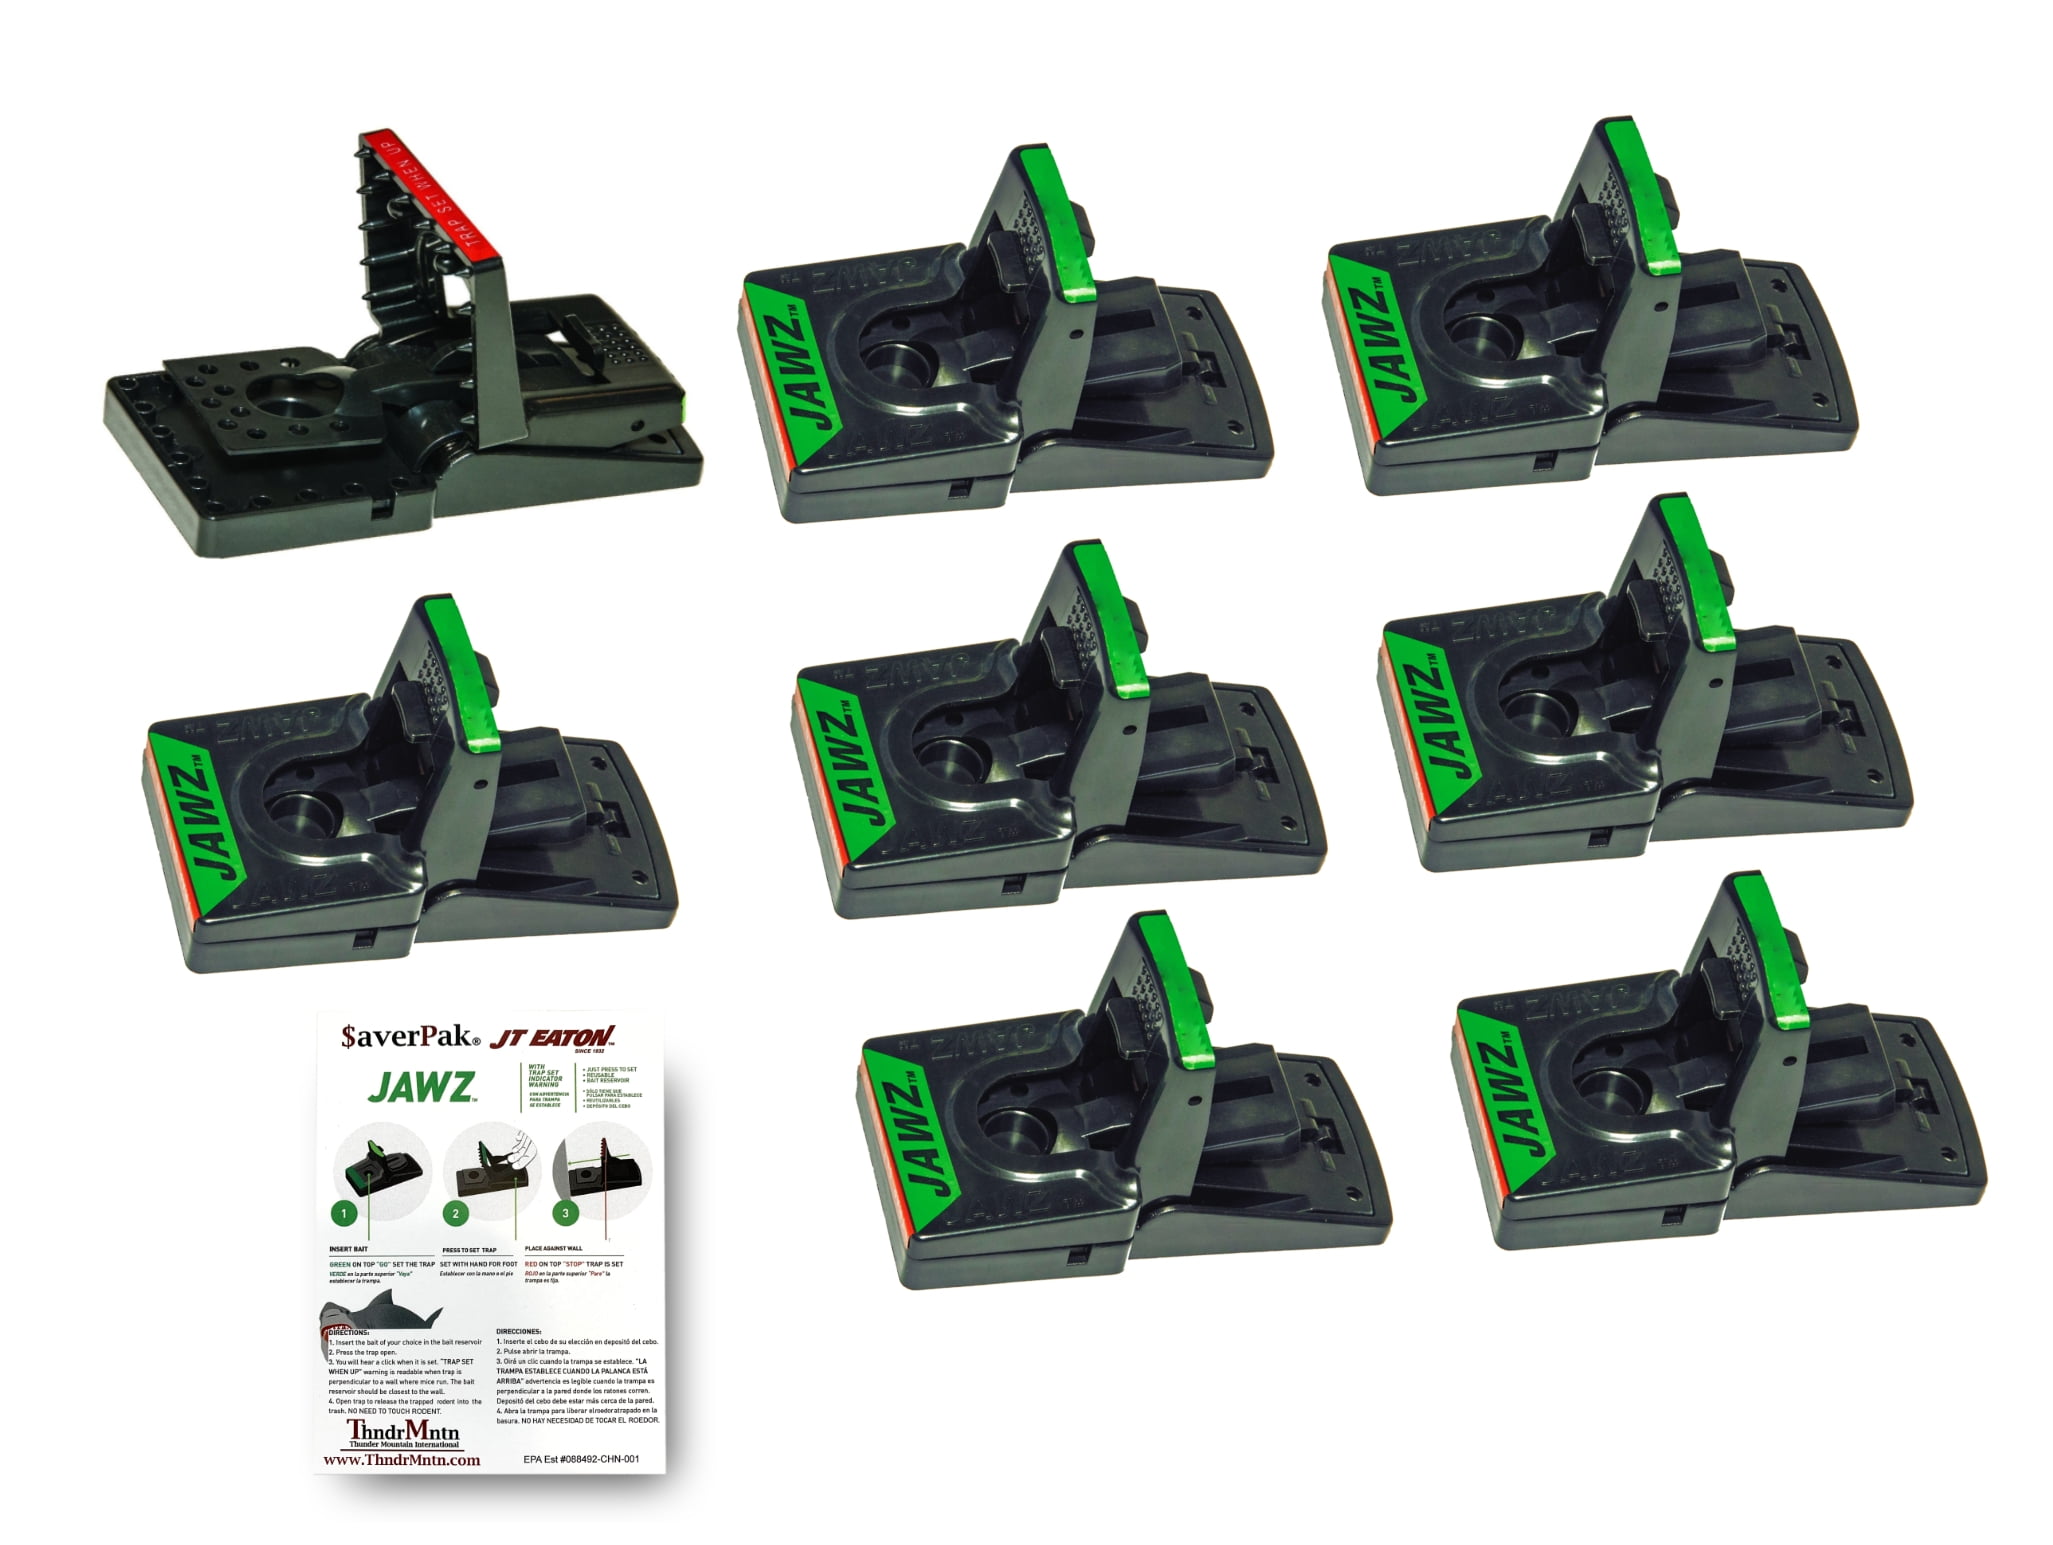 $averPak 2 Pack - Includes 2 JT Eaton Jawz Mouse Traps for use with Solid  or Liquid Baits